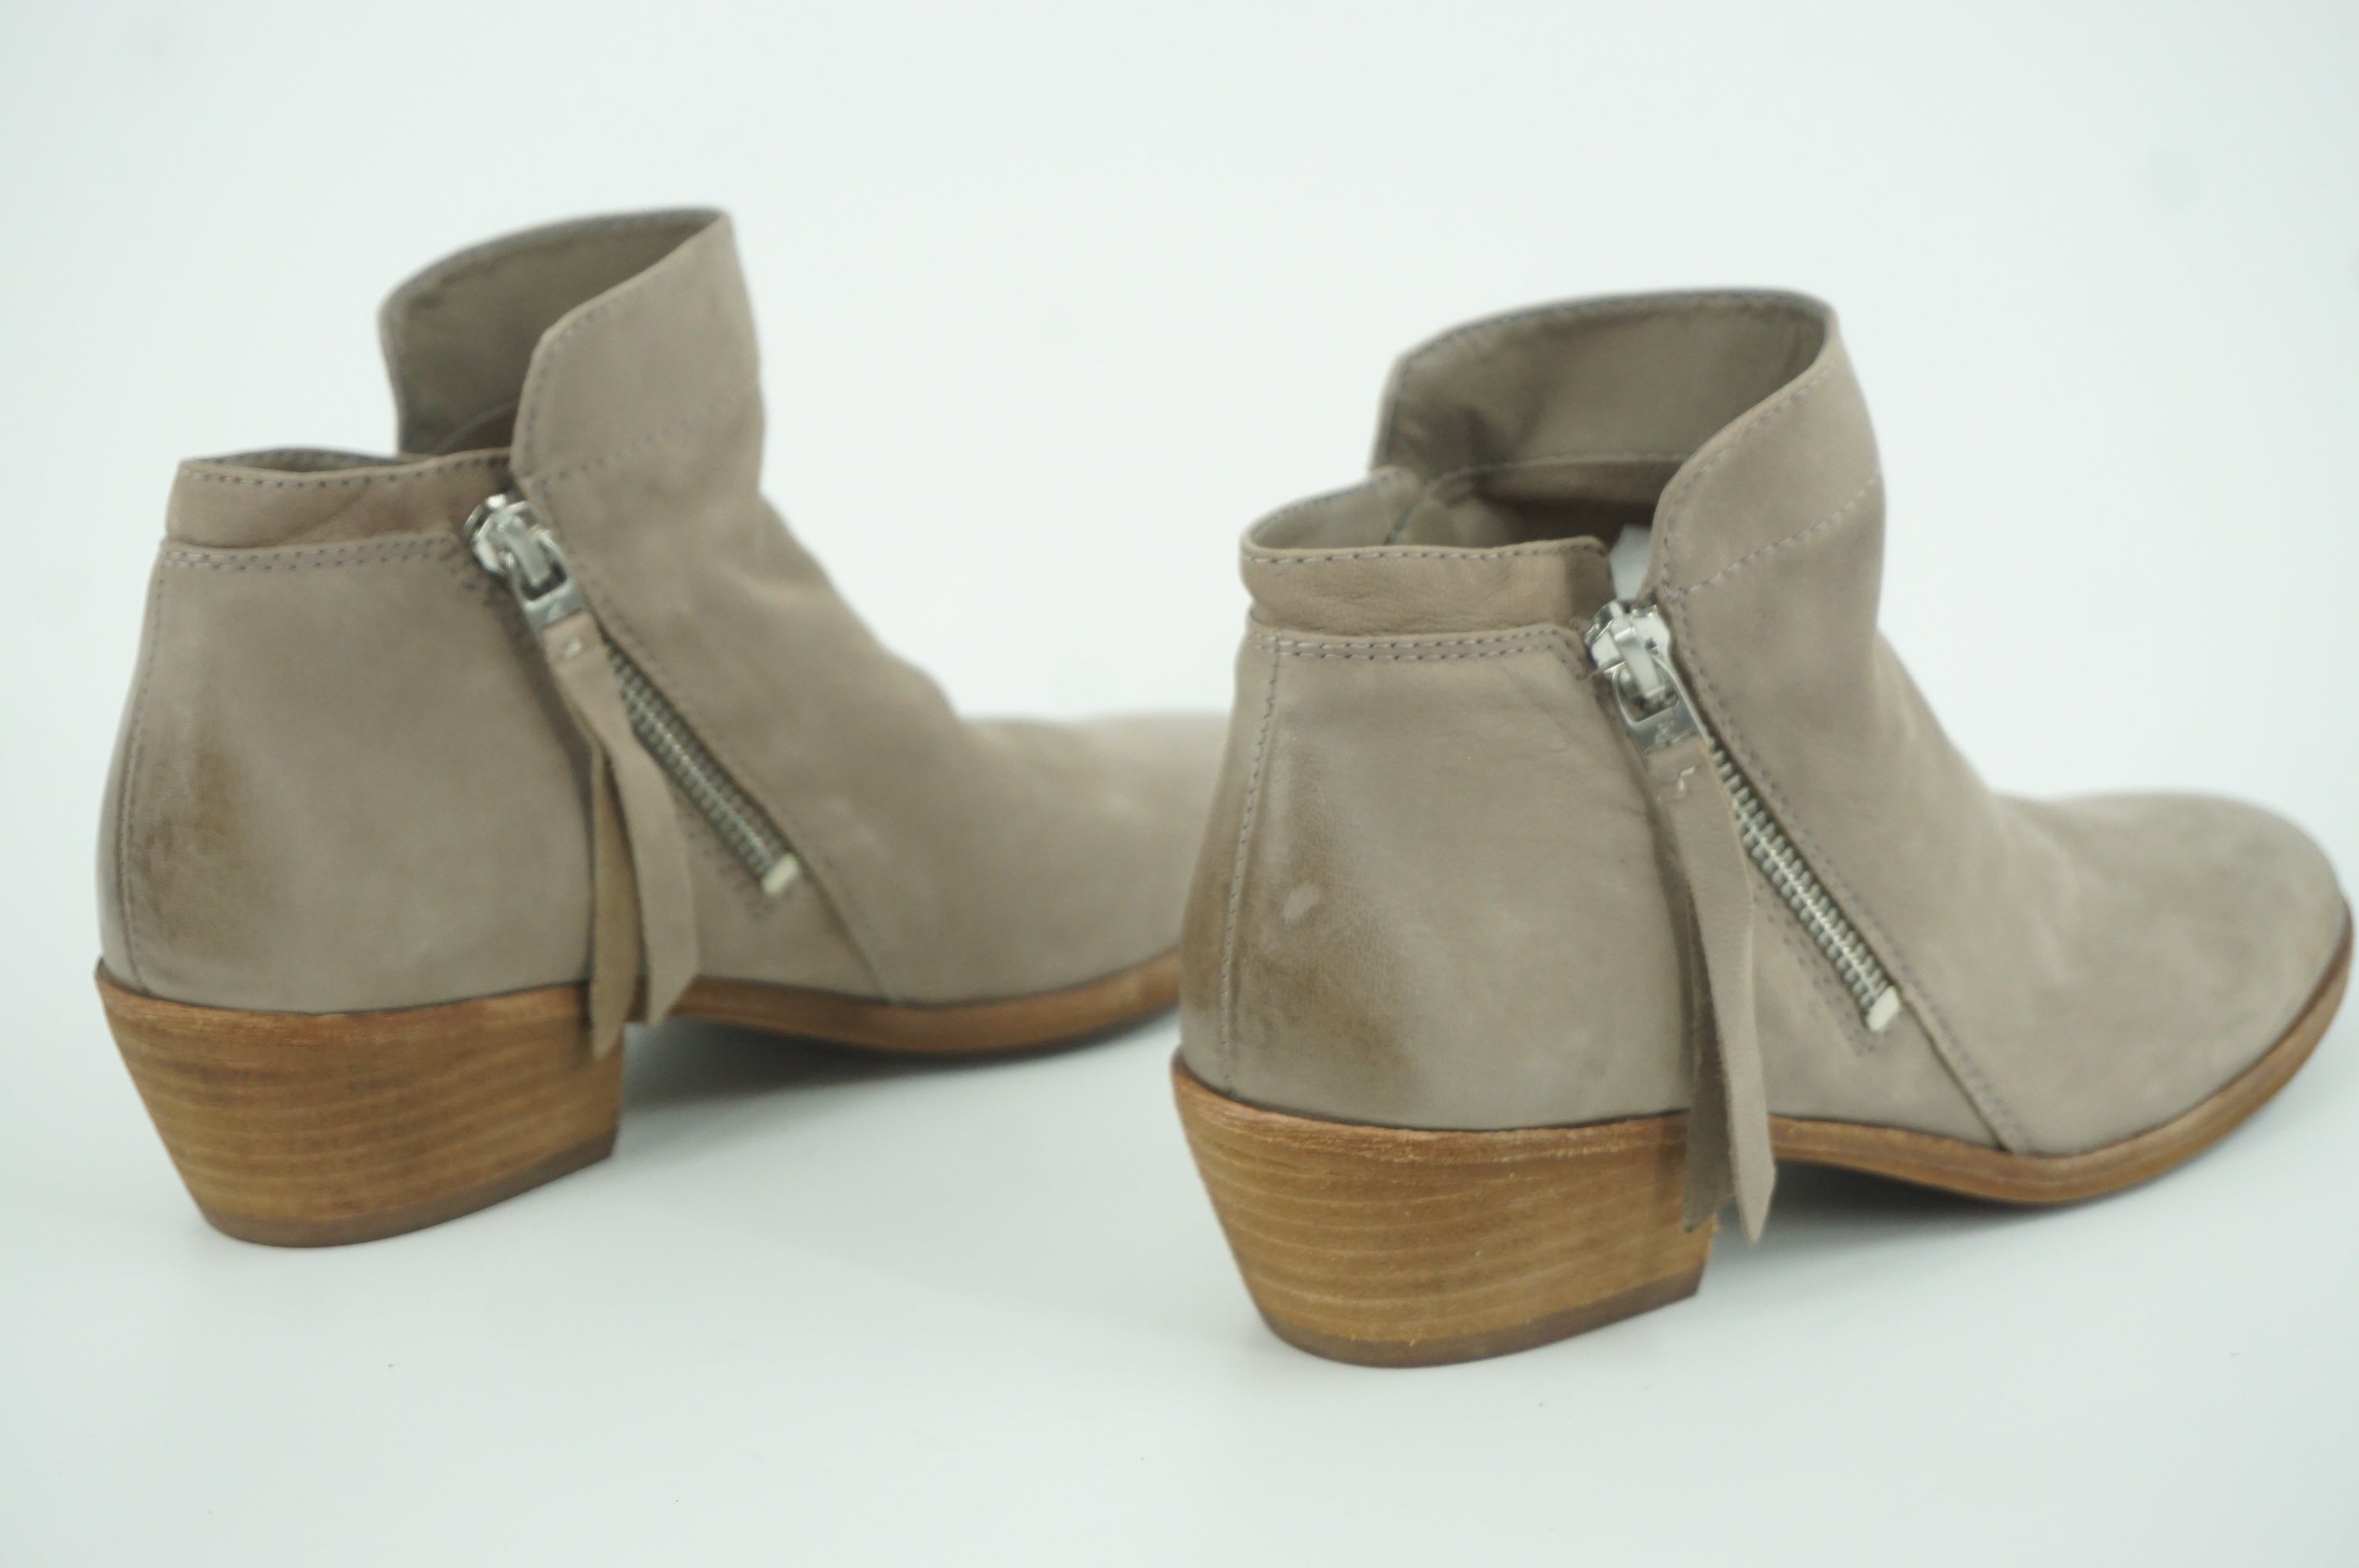 Sam Edelman Packer Zip Taupe Suede ankle booties size 6.5 New $130